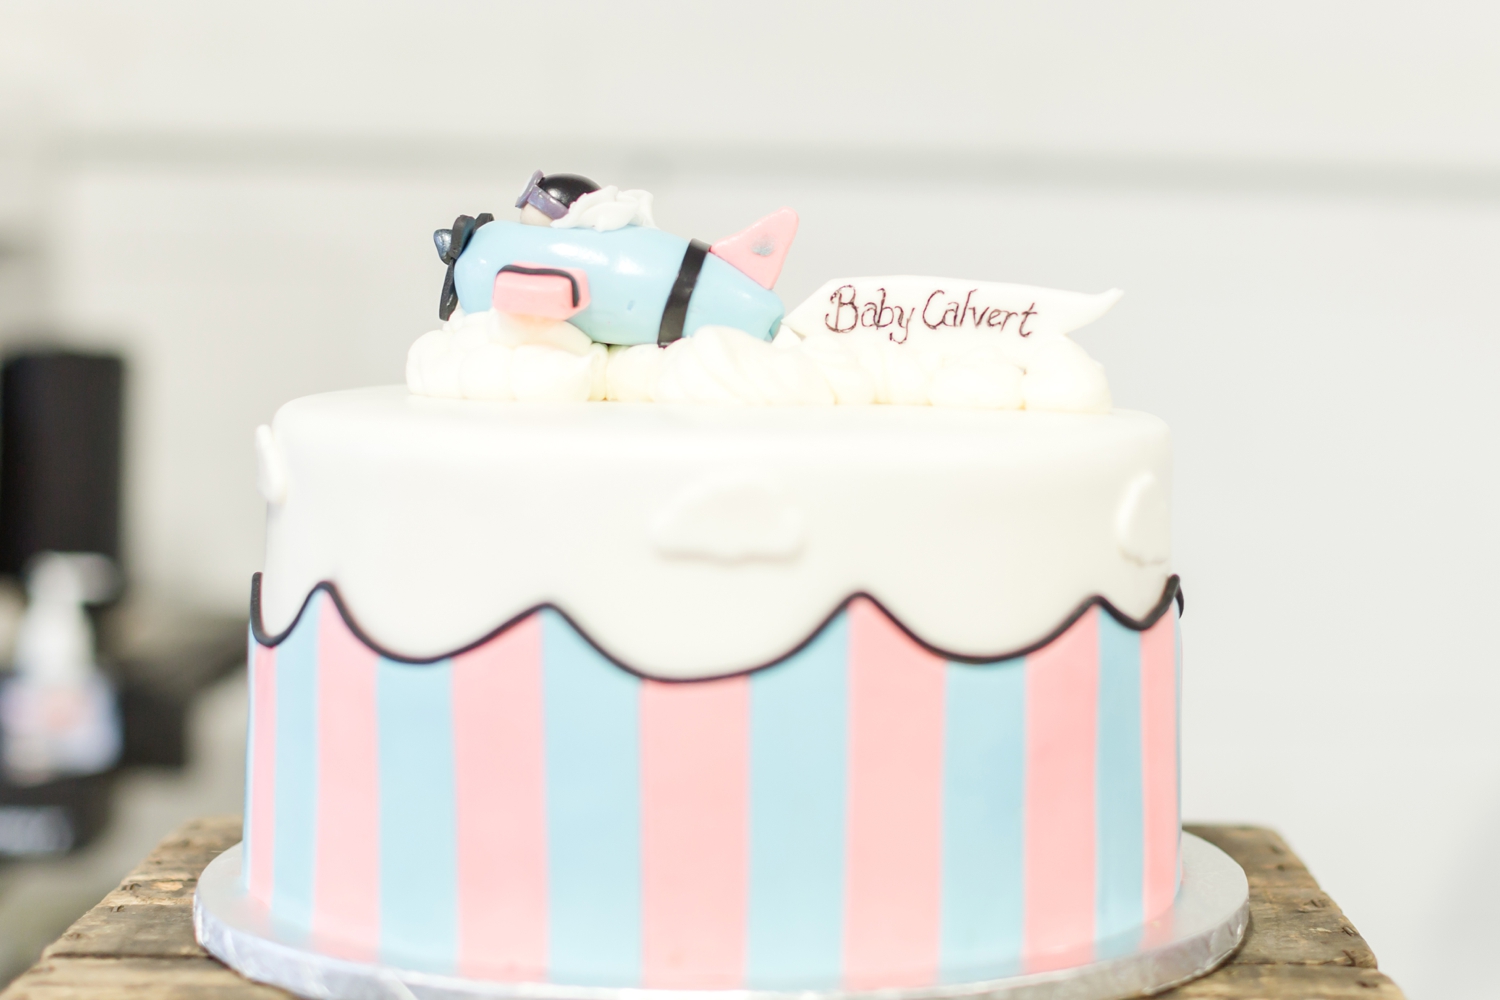  This cake is so cute! 